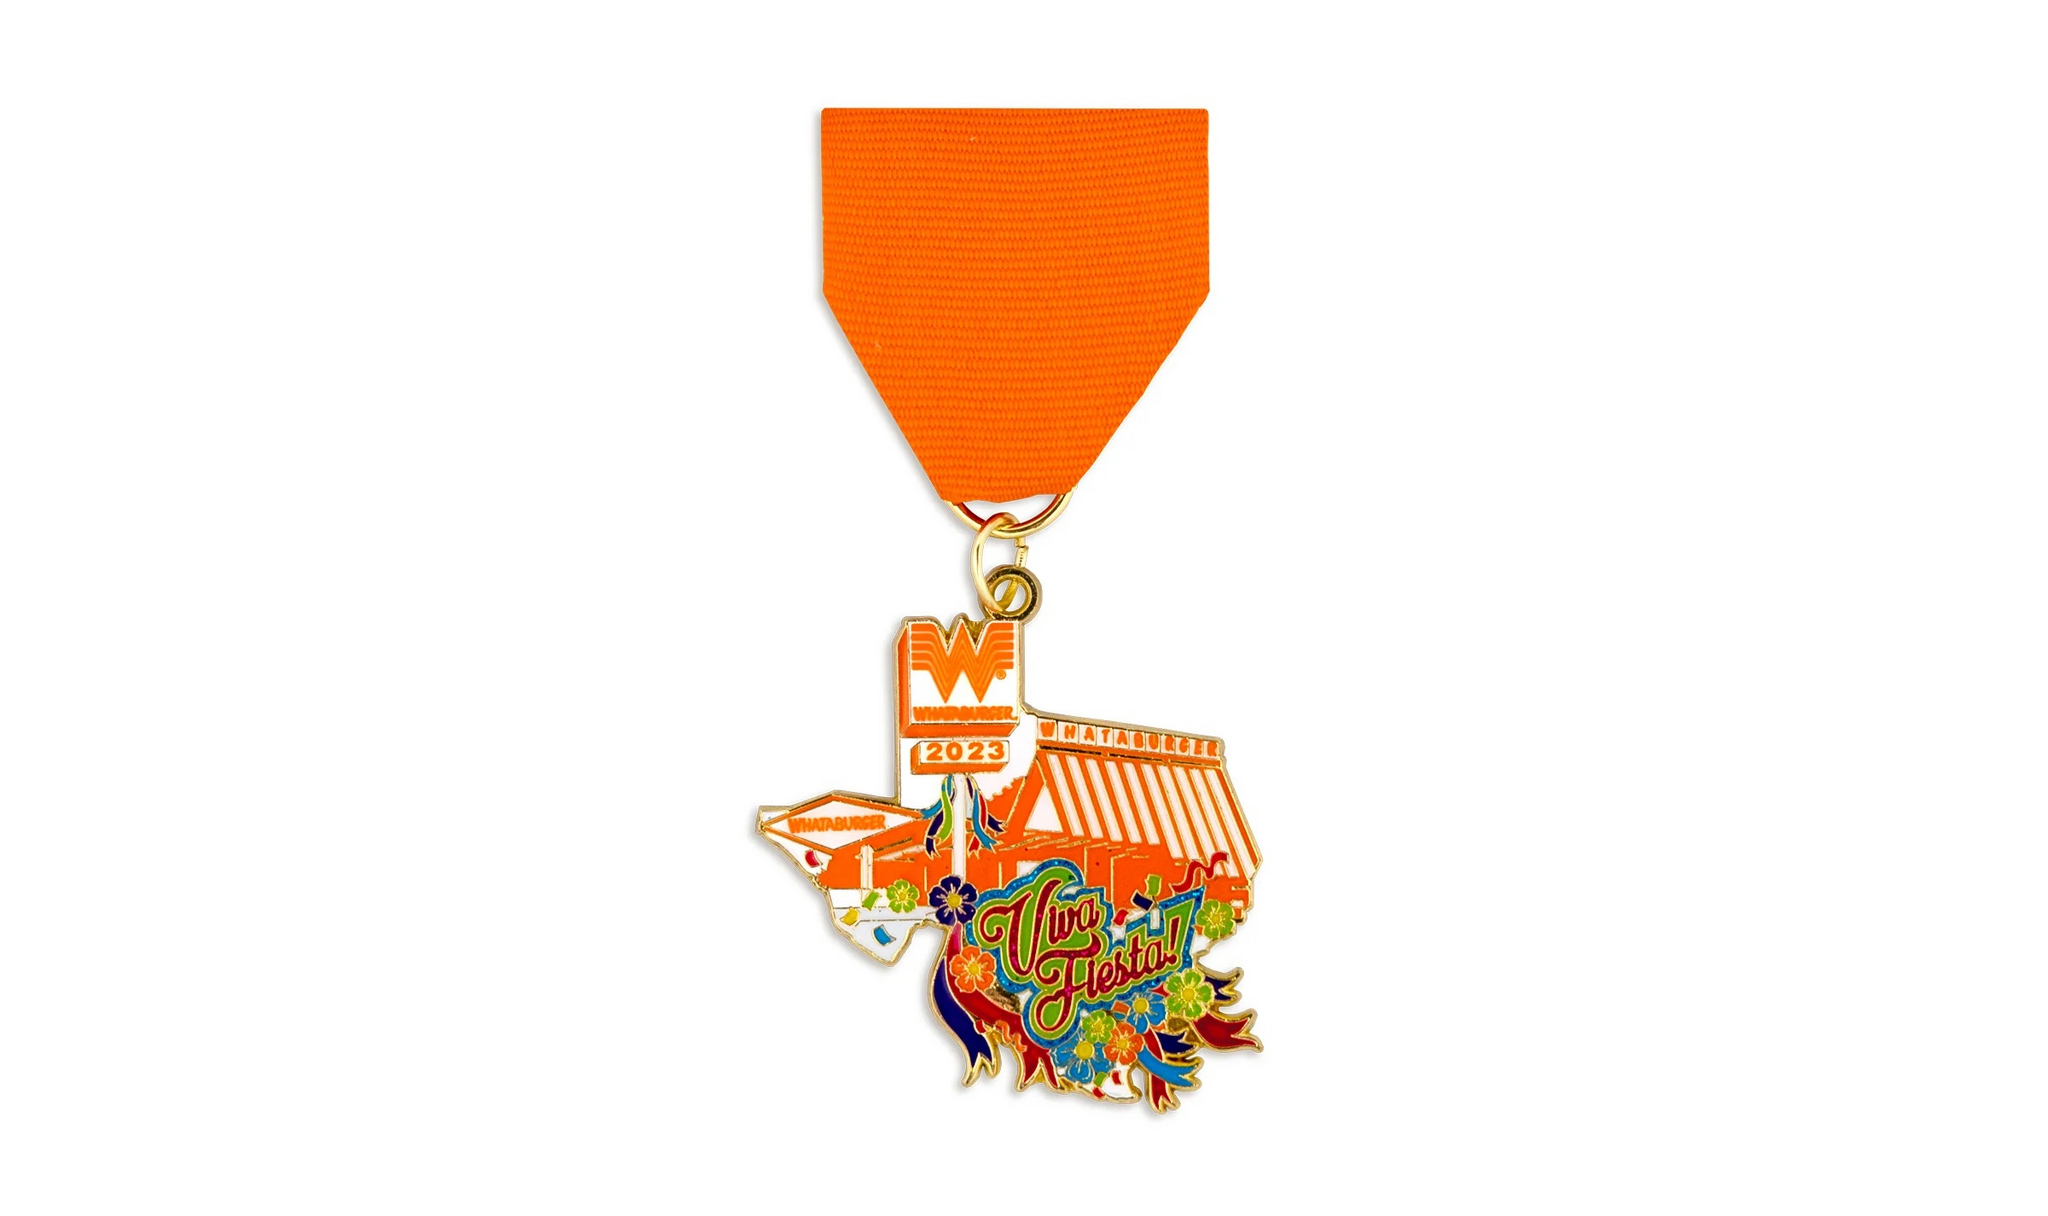 SA Flavor reveals Fiestamon trading card medals for Fiesta 2023